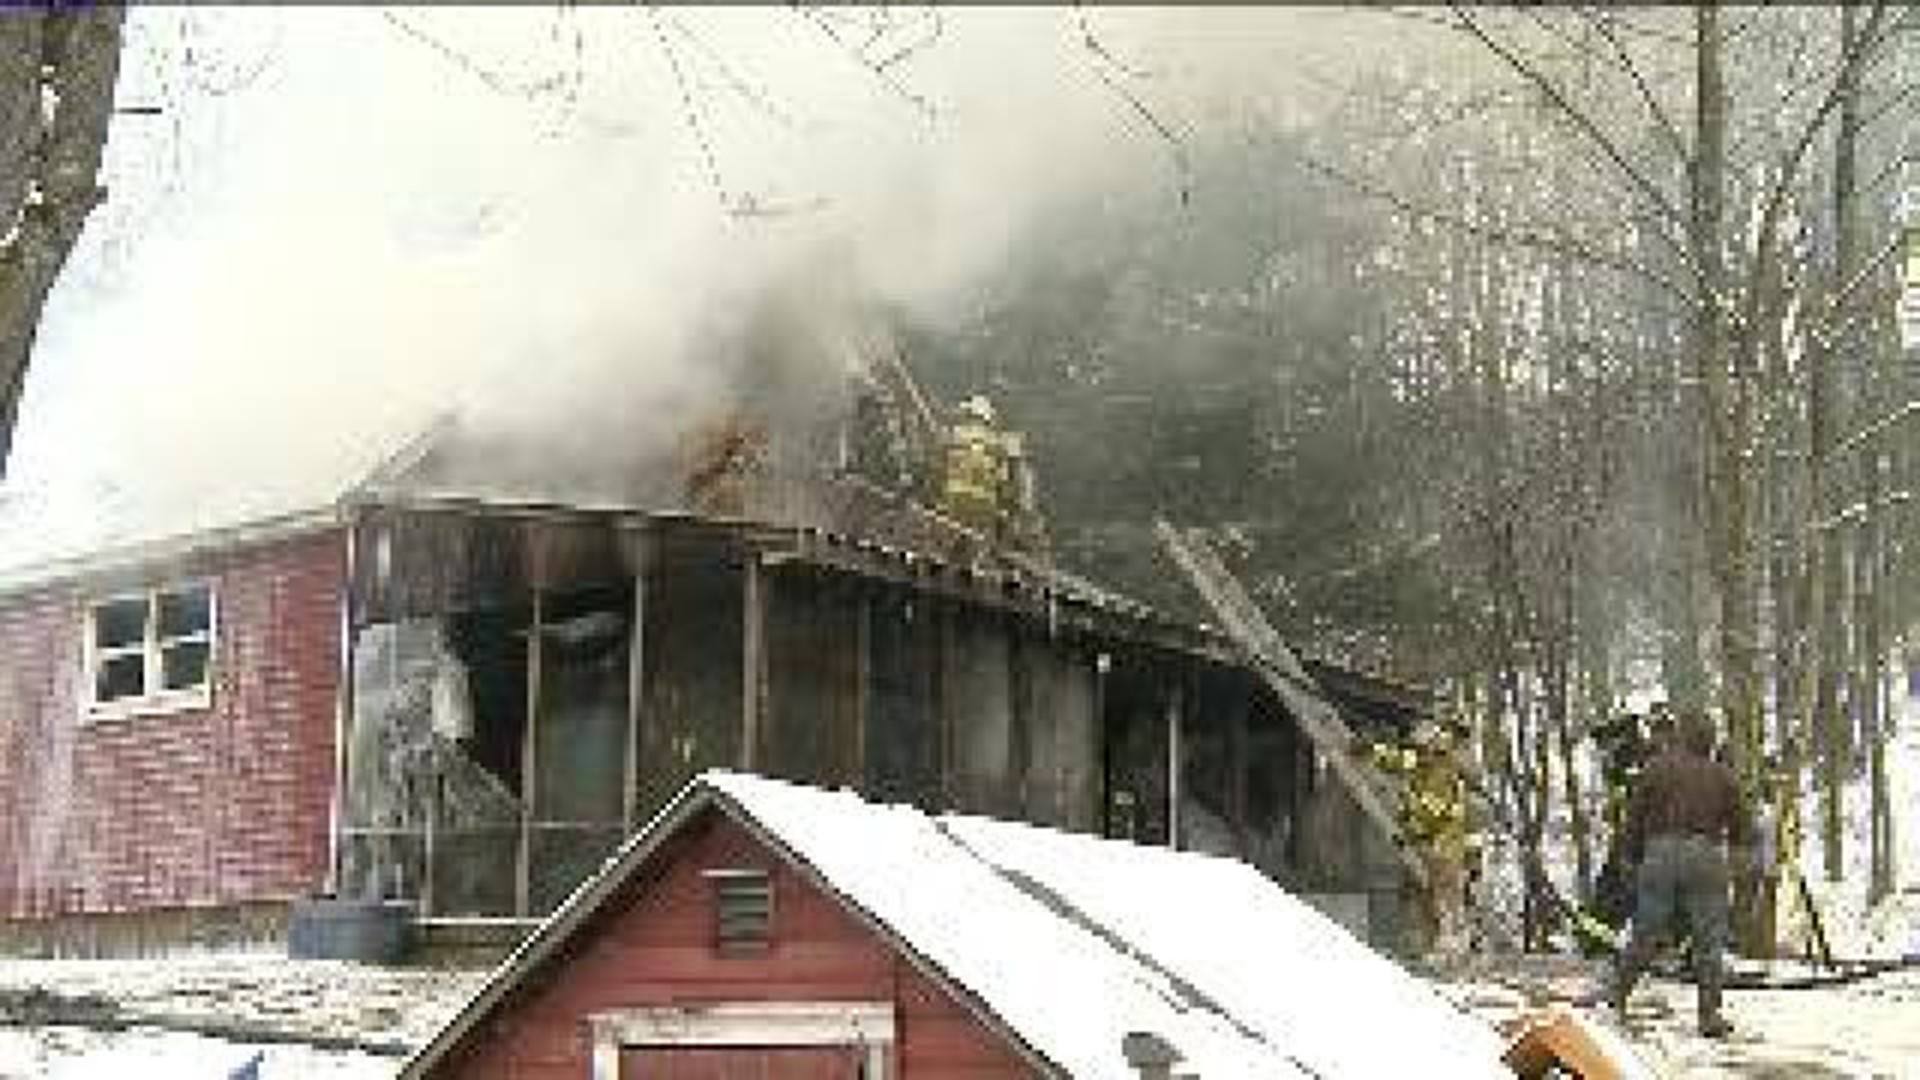 Home Destroyed by Fire, Possibly Caused by Stray Dog